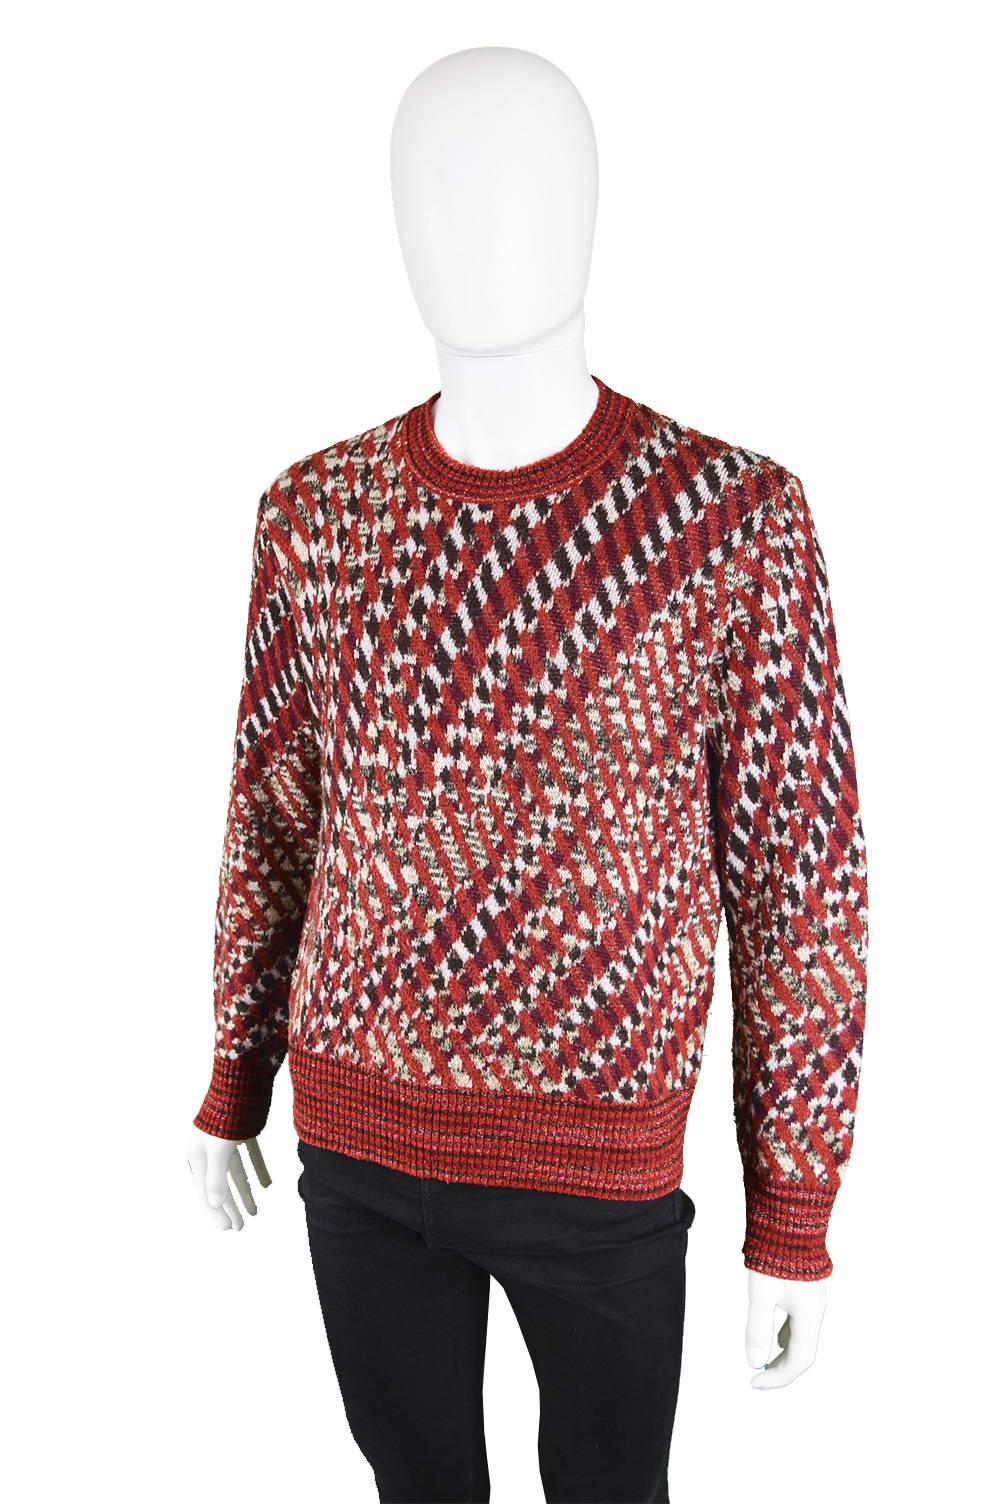  Missoni Men's Vintage 1980s Red Patterned Wool Rayon & Mohair Blend Sweater In Excellent Condition For Sale In Doncaster, South Yorkshire